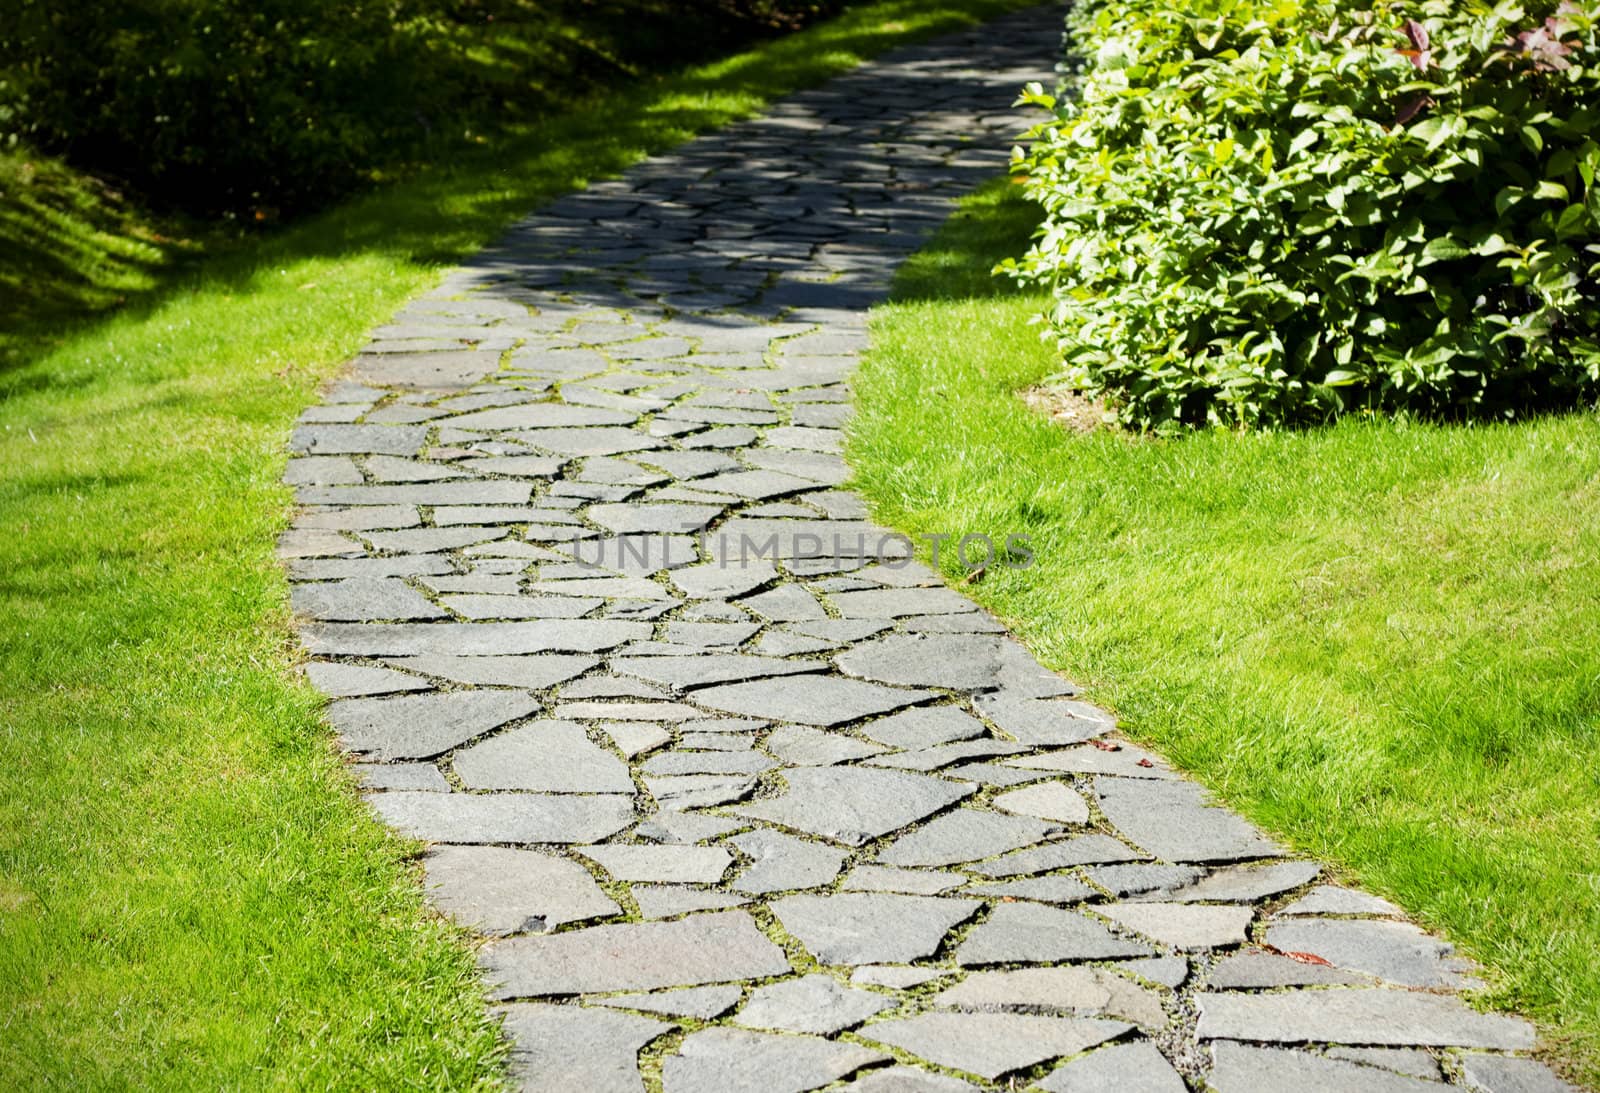 Garden path paved with a natural stone in a autumn garden